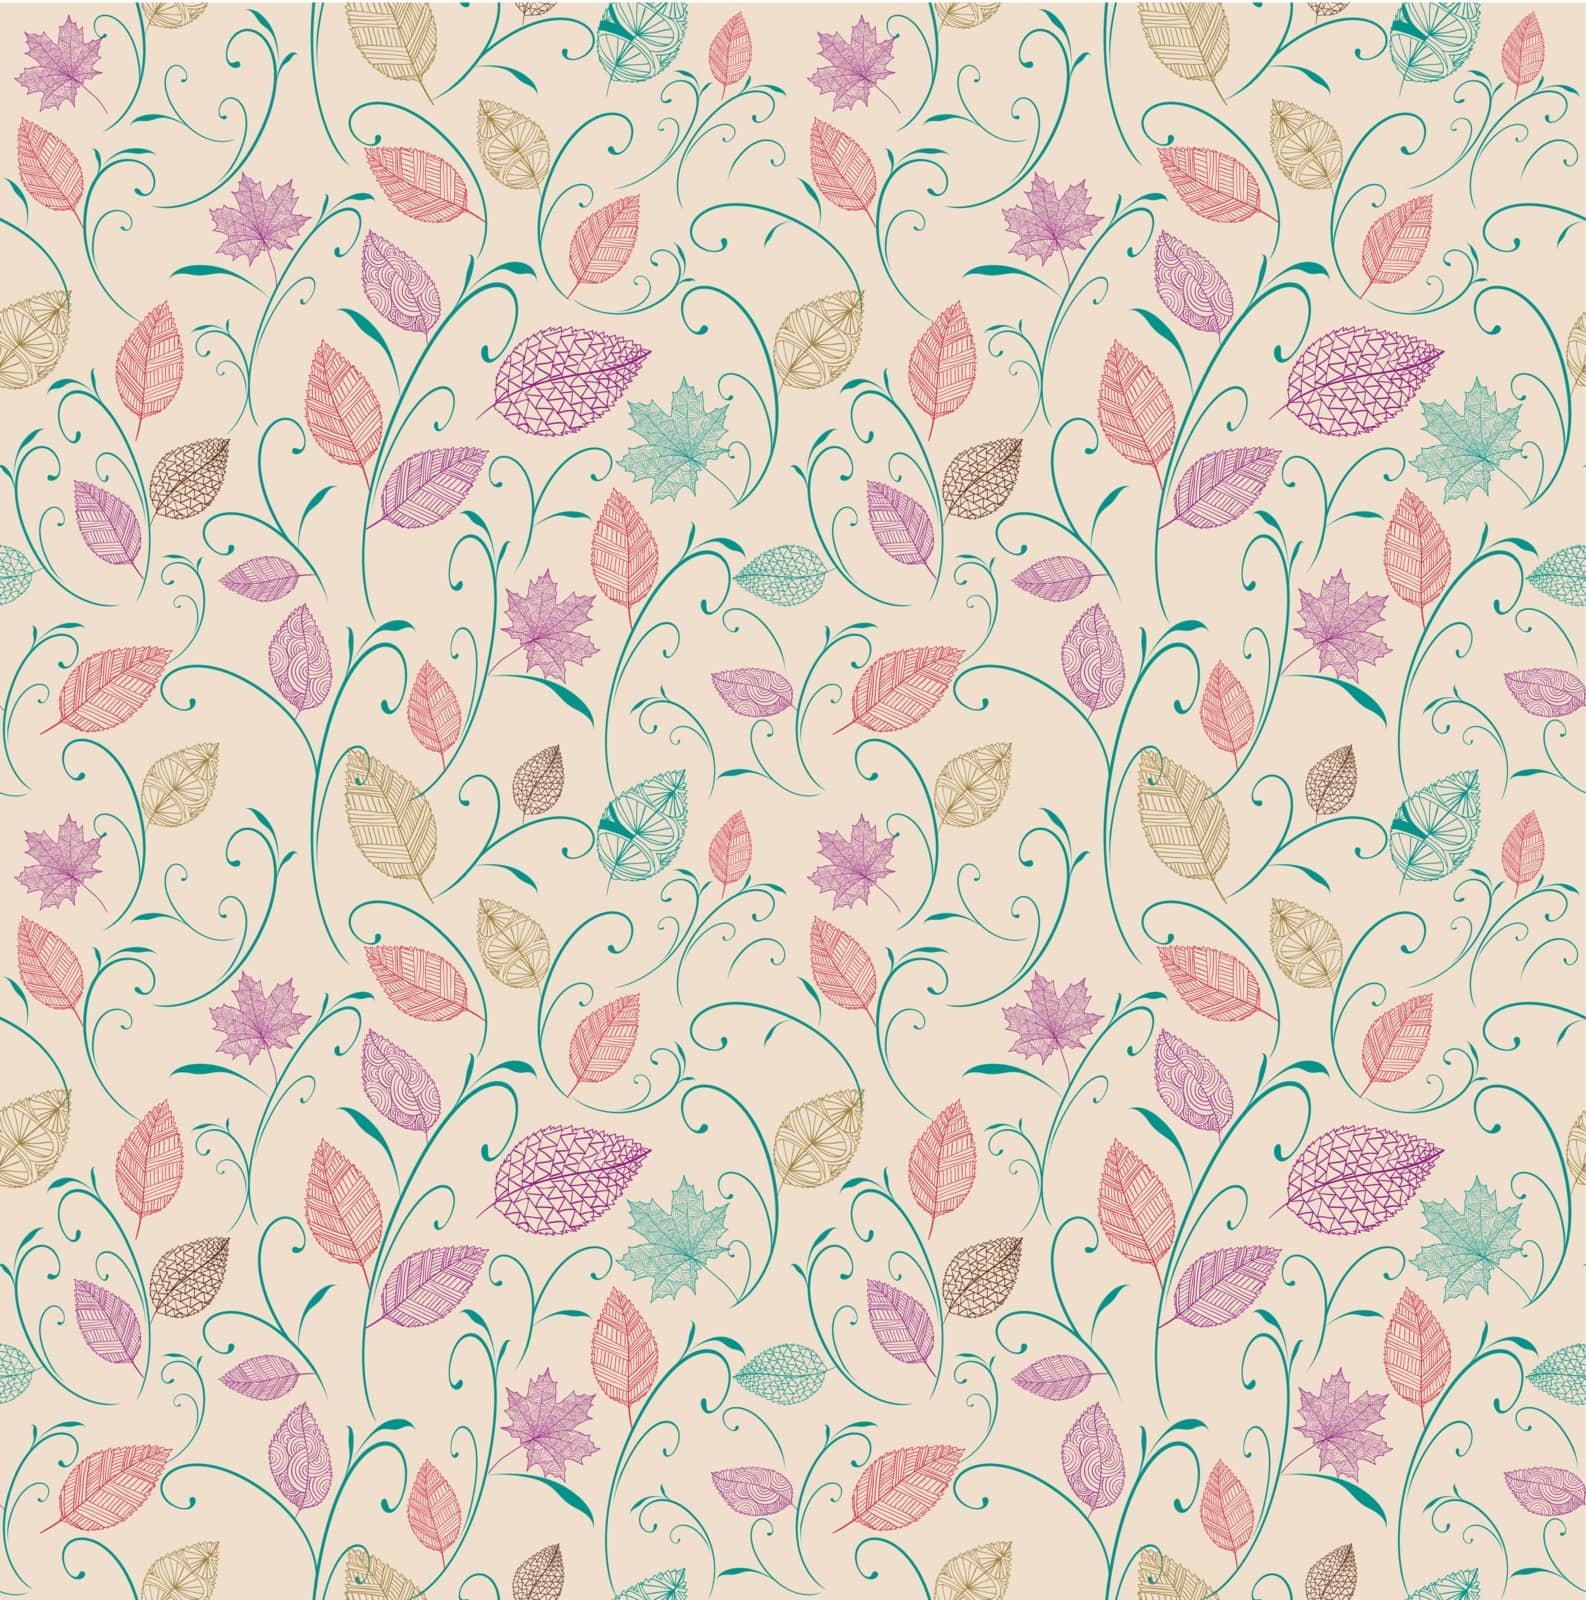 Vintage autumn leaves seamless pattern background. EPS10 file. by cienpies